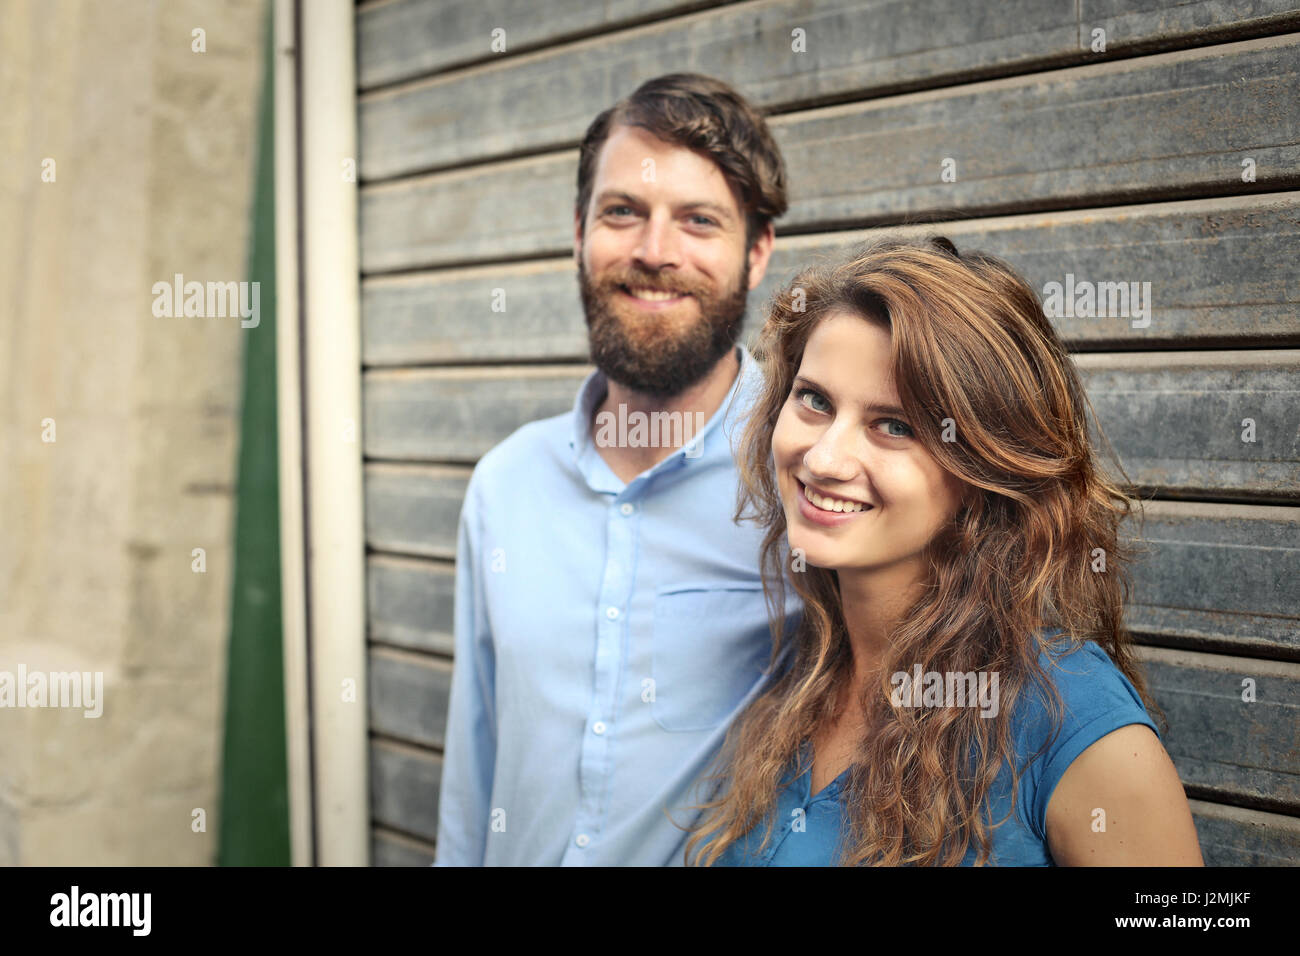 Couple looking into camera Stock Photo